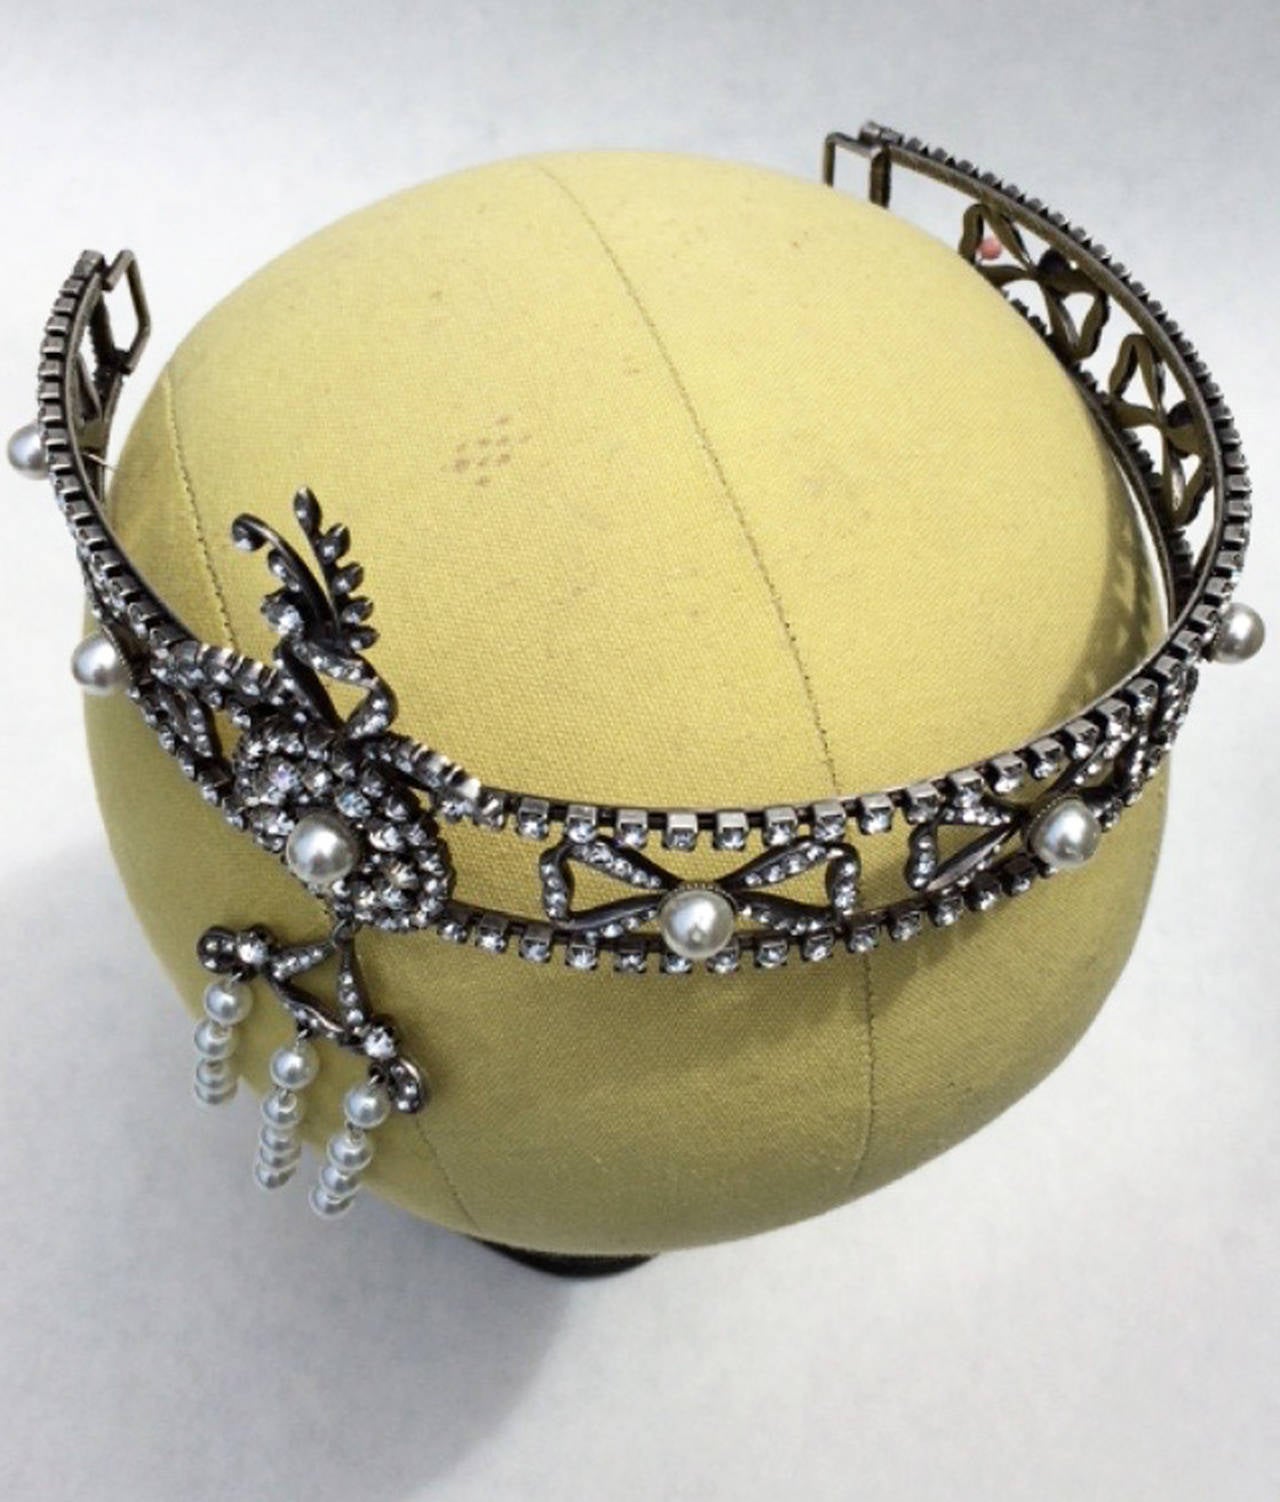 A fine and rare vintage diadem headband. Japanned brass engraved metal item features prong set crystals and faux pearl centers and pendant. Excellent.